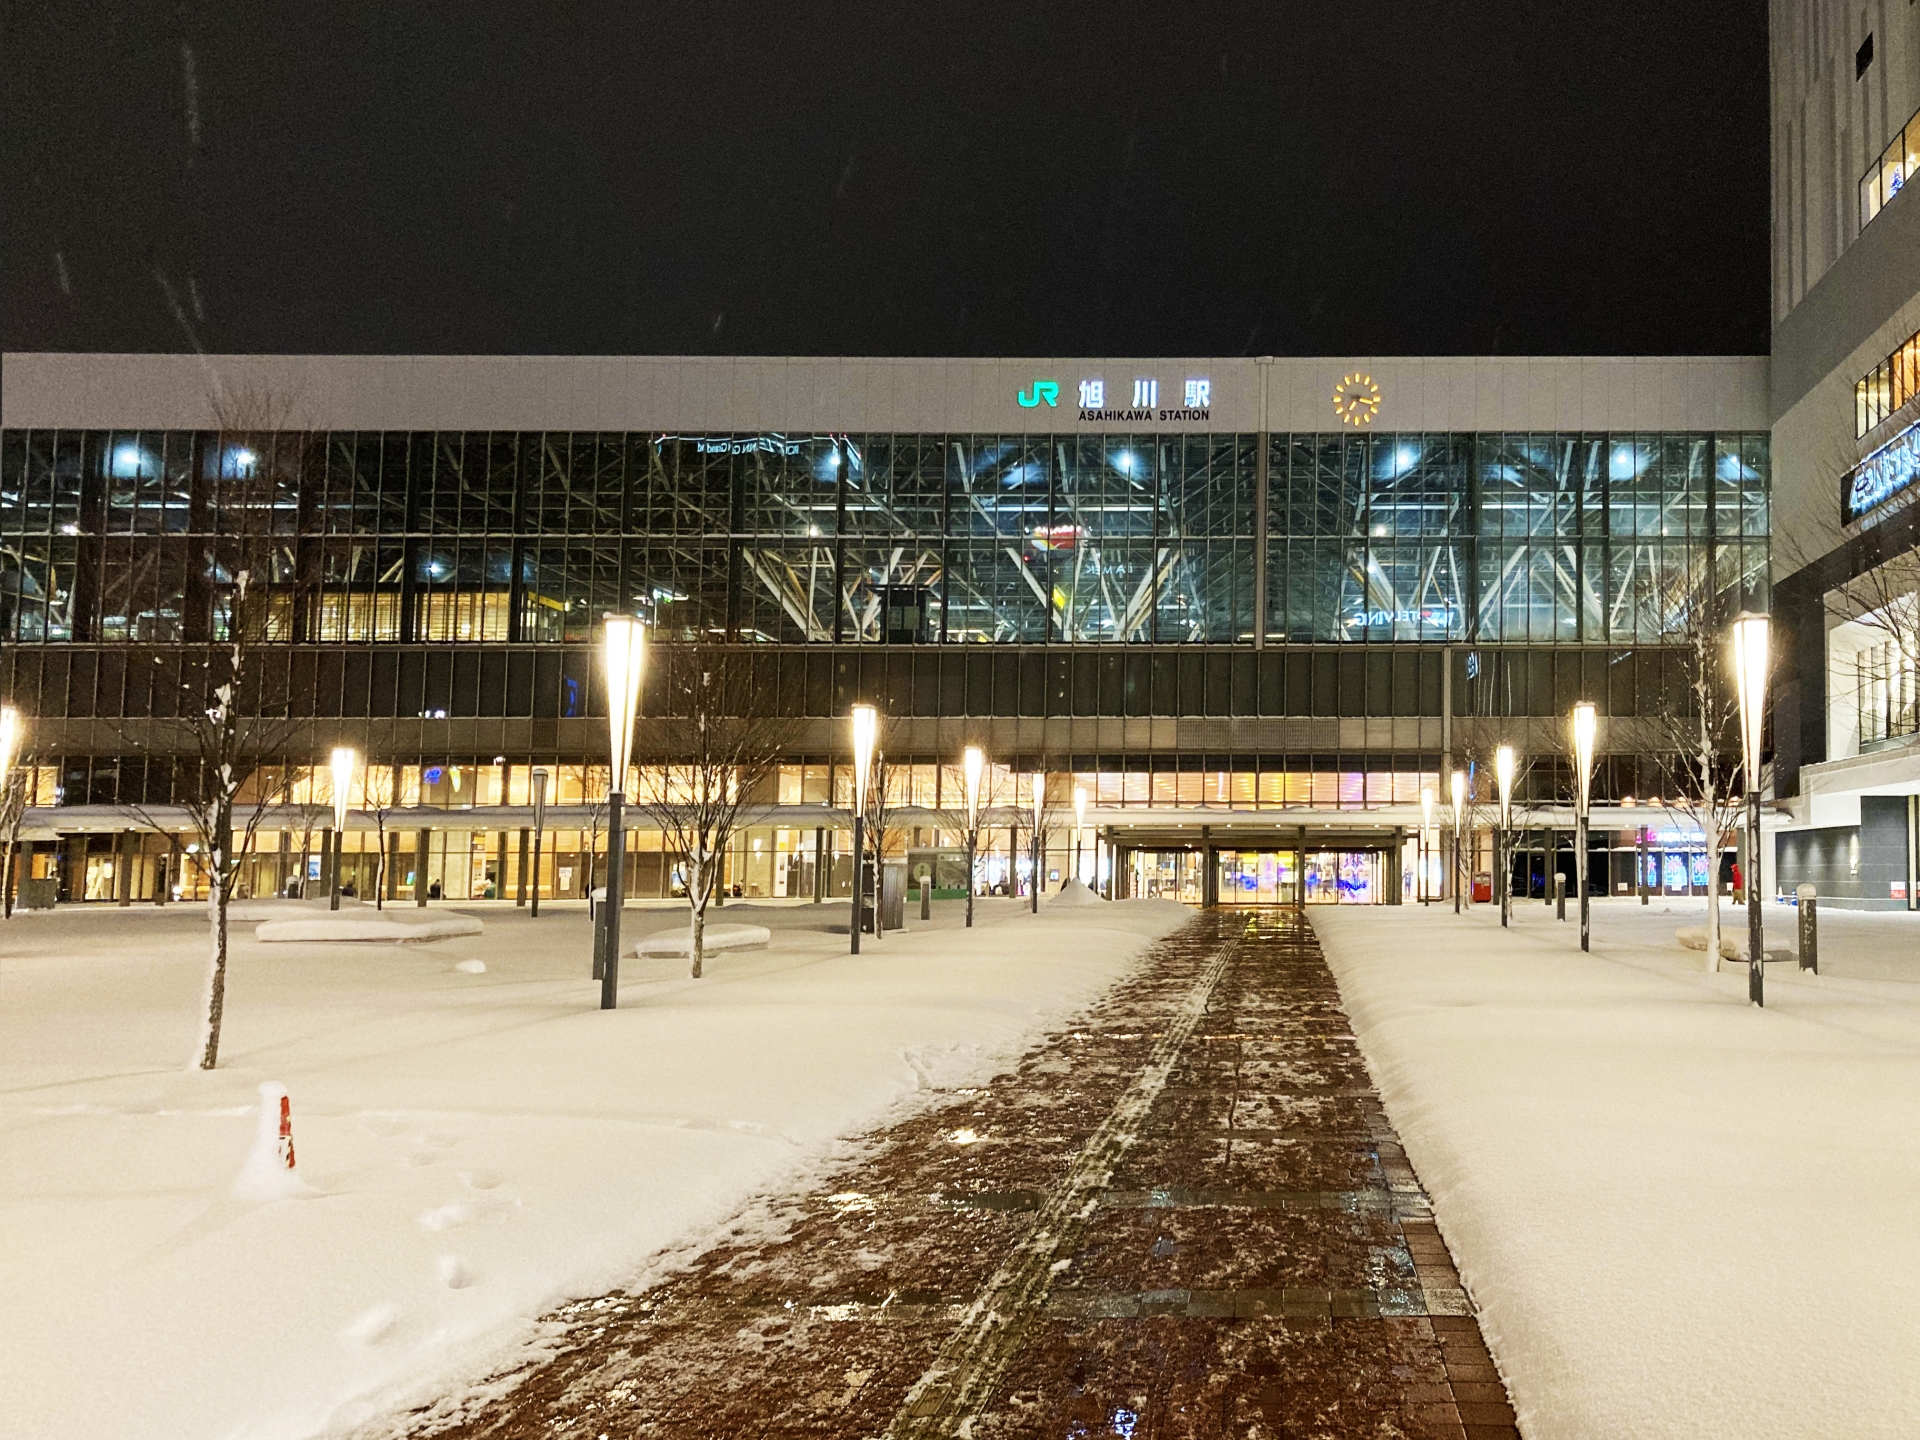 Asahikawa central station in winter, of which front yard is covered with snow